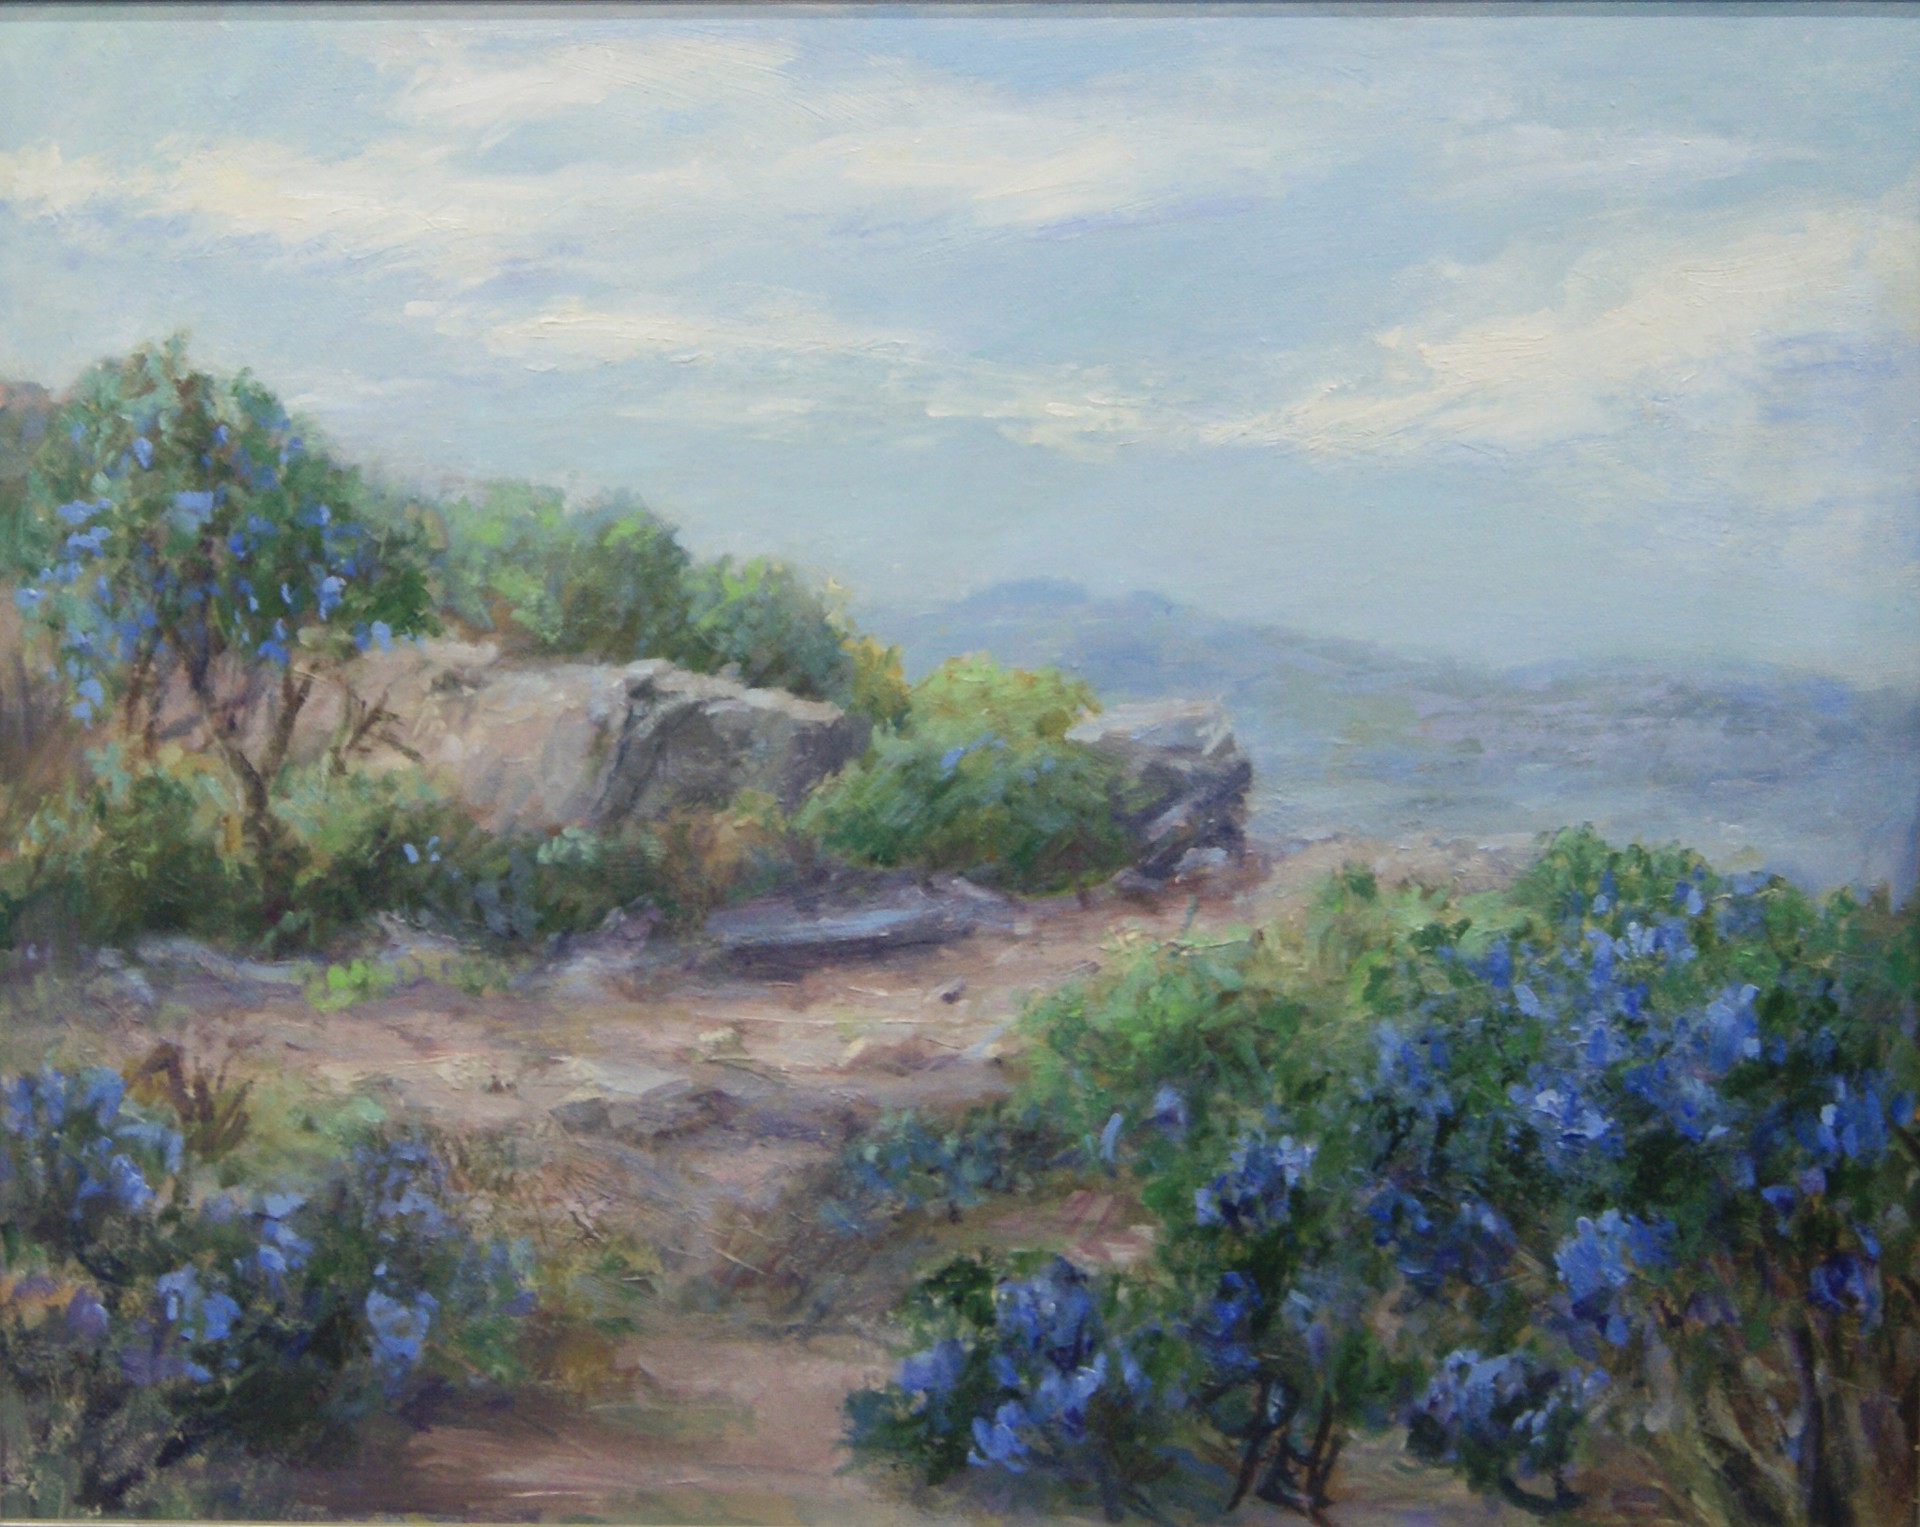 Texas Mountain Laurel by Lilli Pell